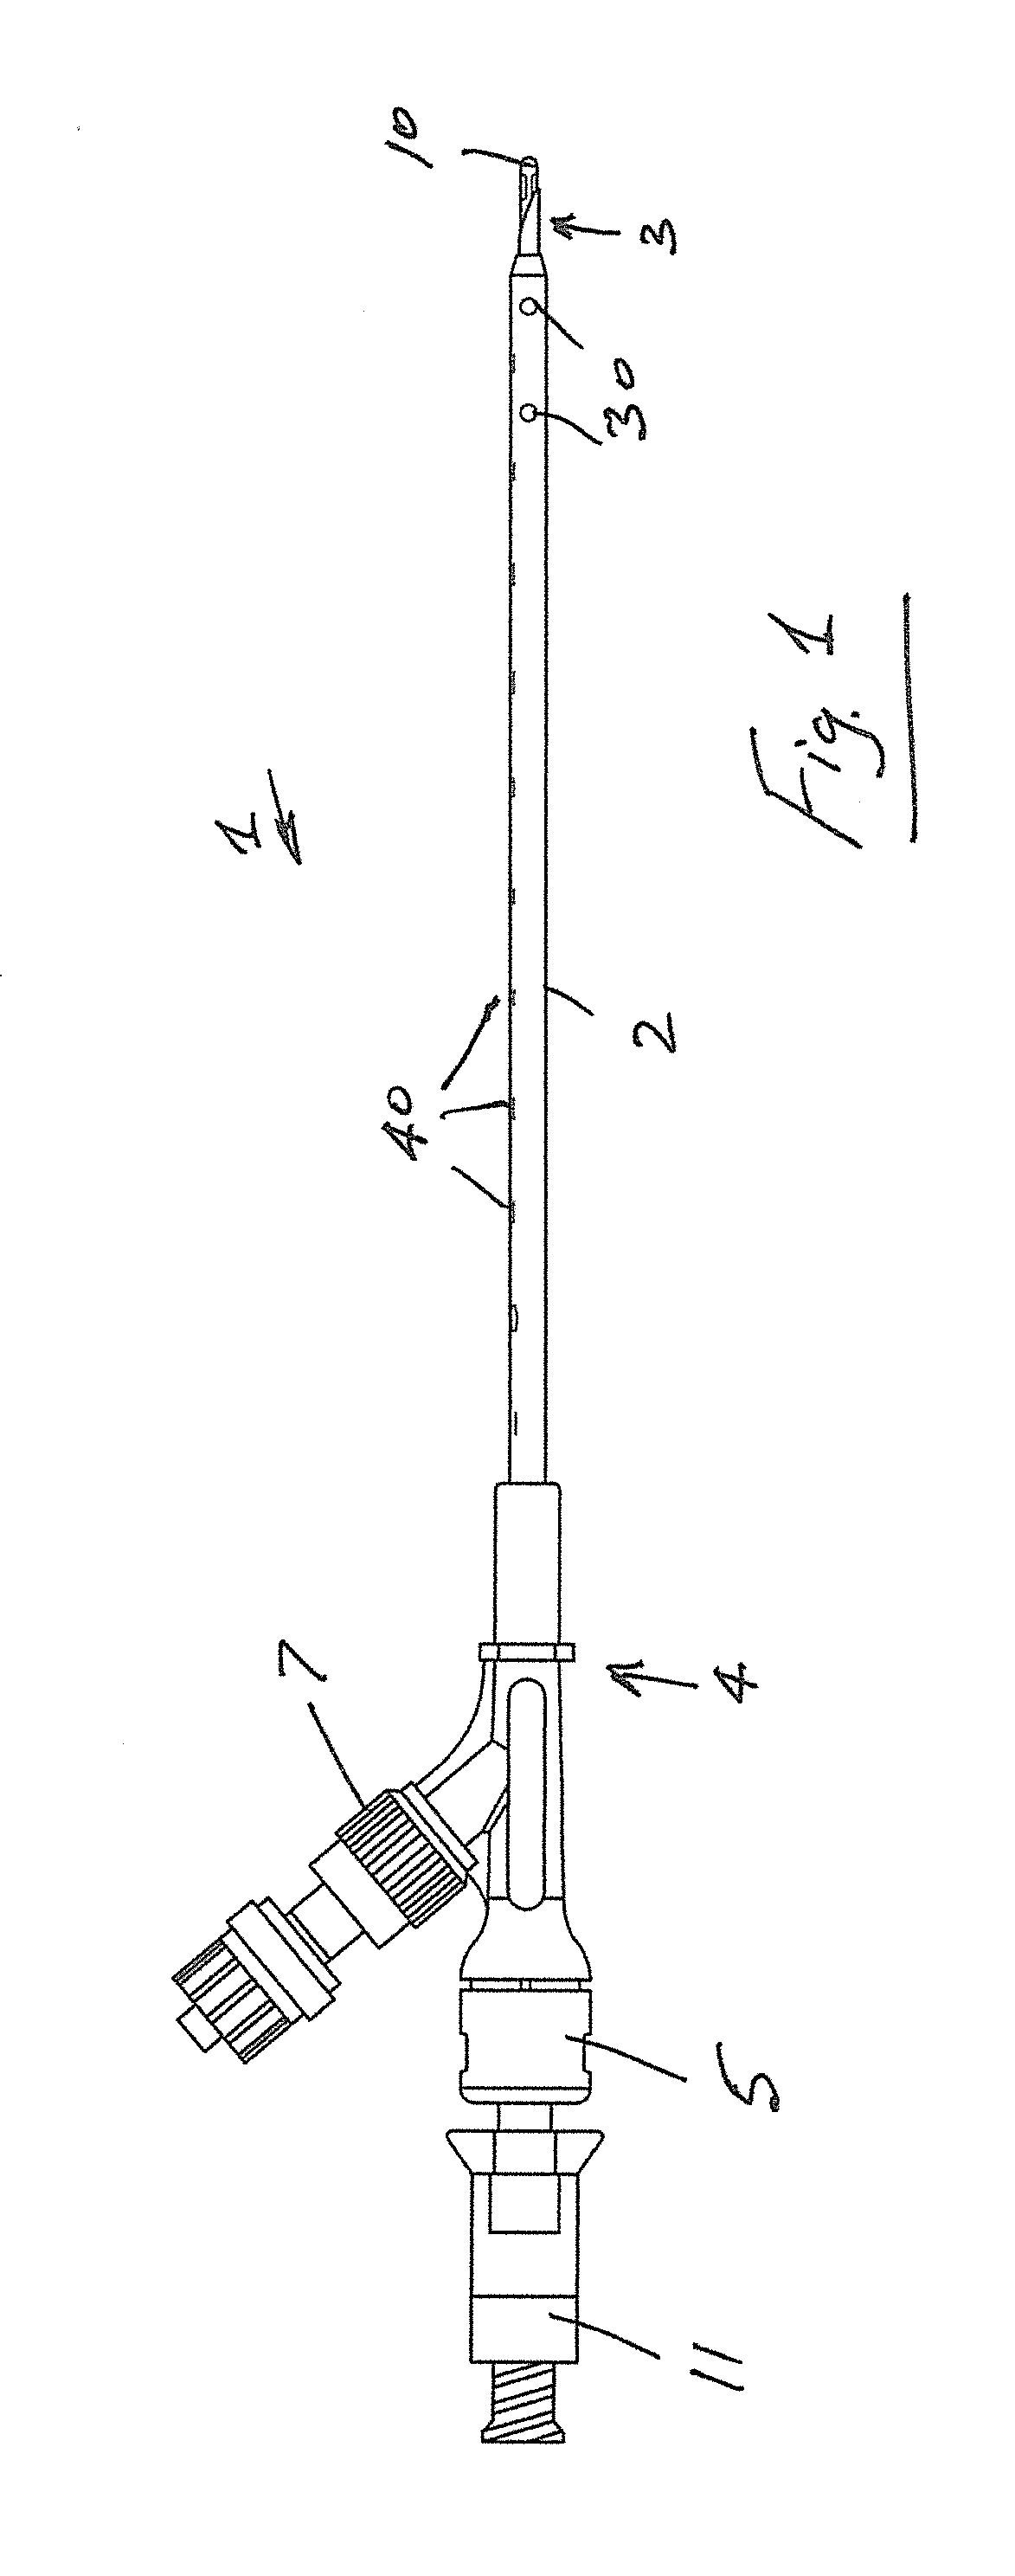 Transcutaneous device for removal of fluid from a body